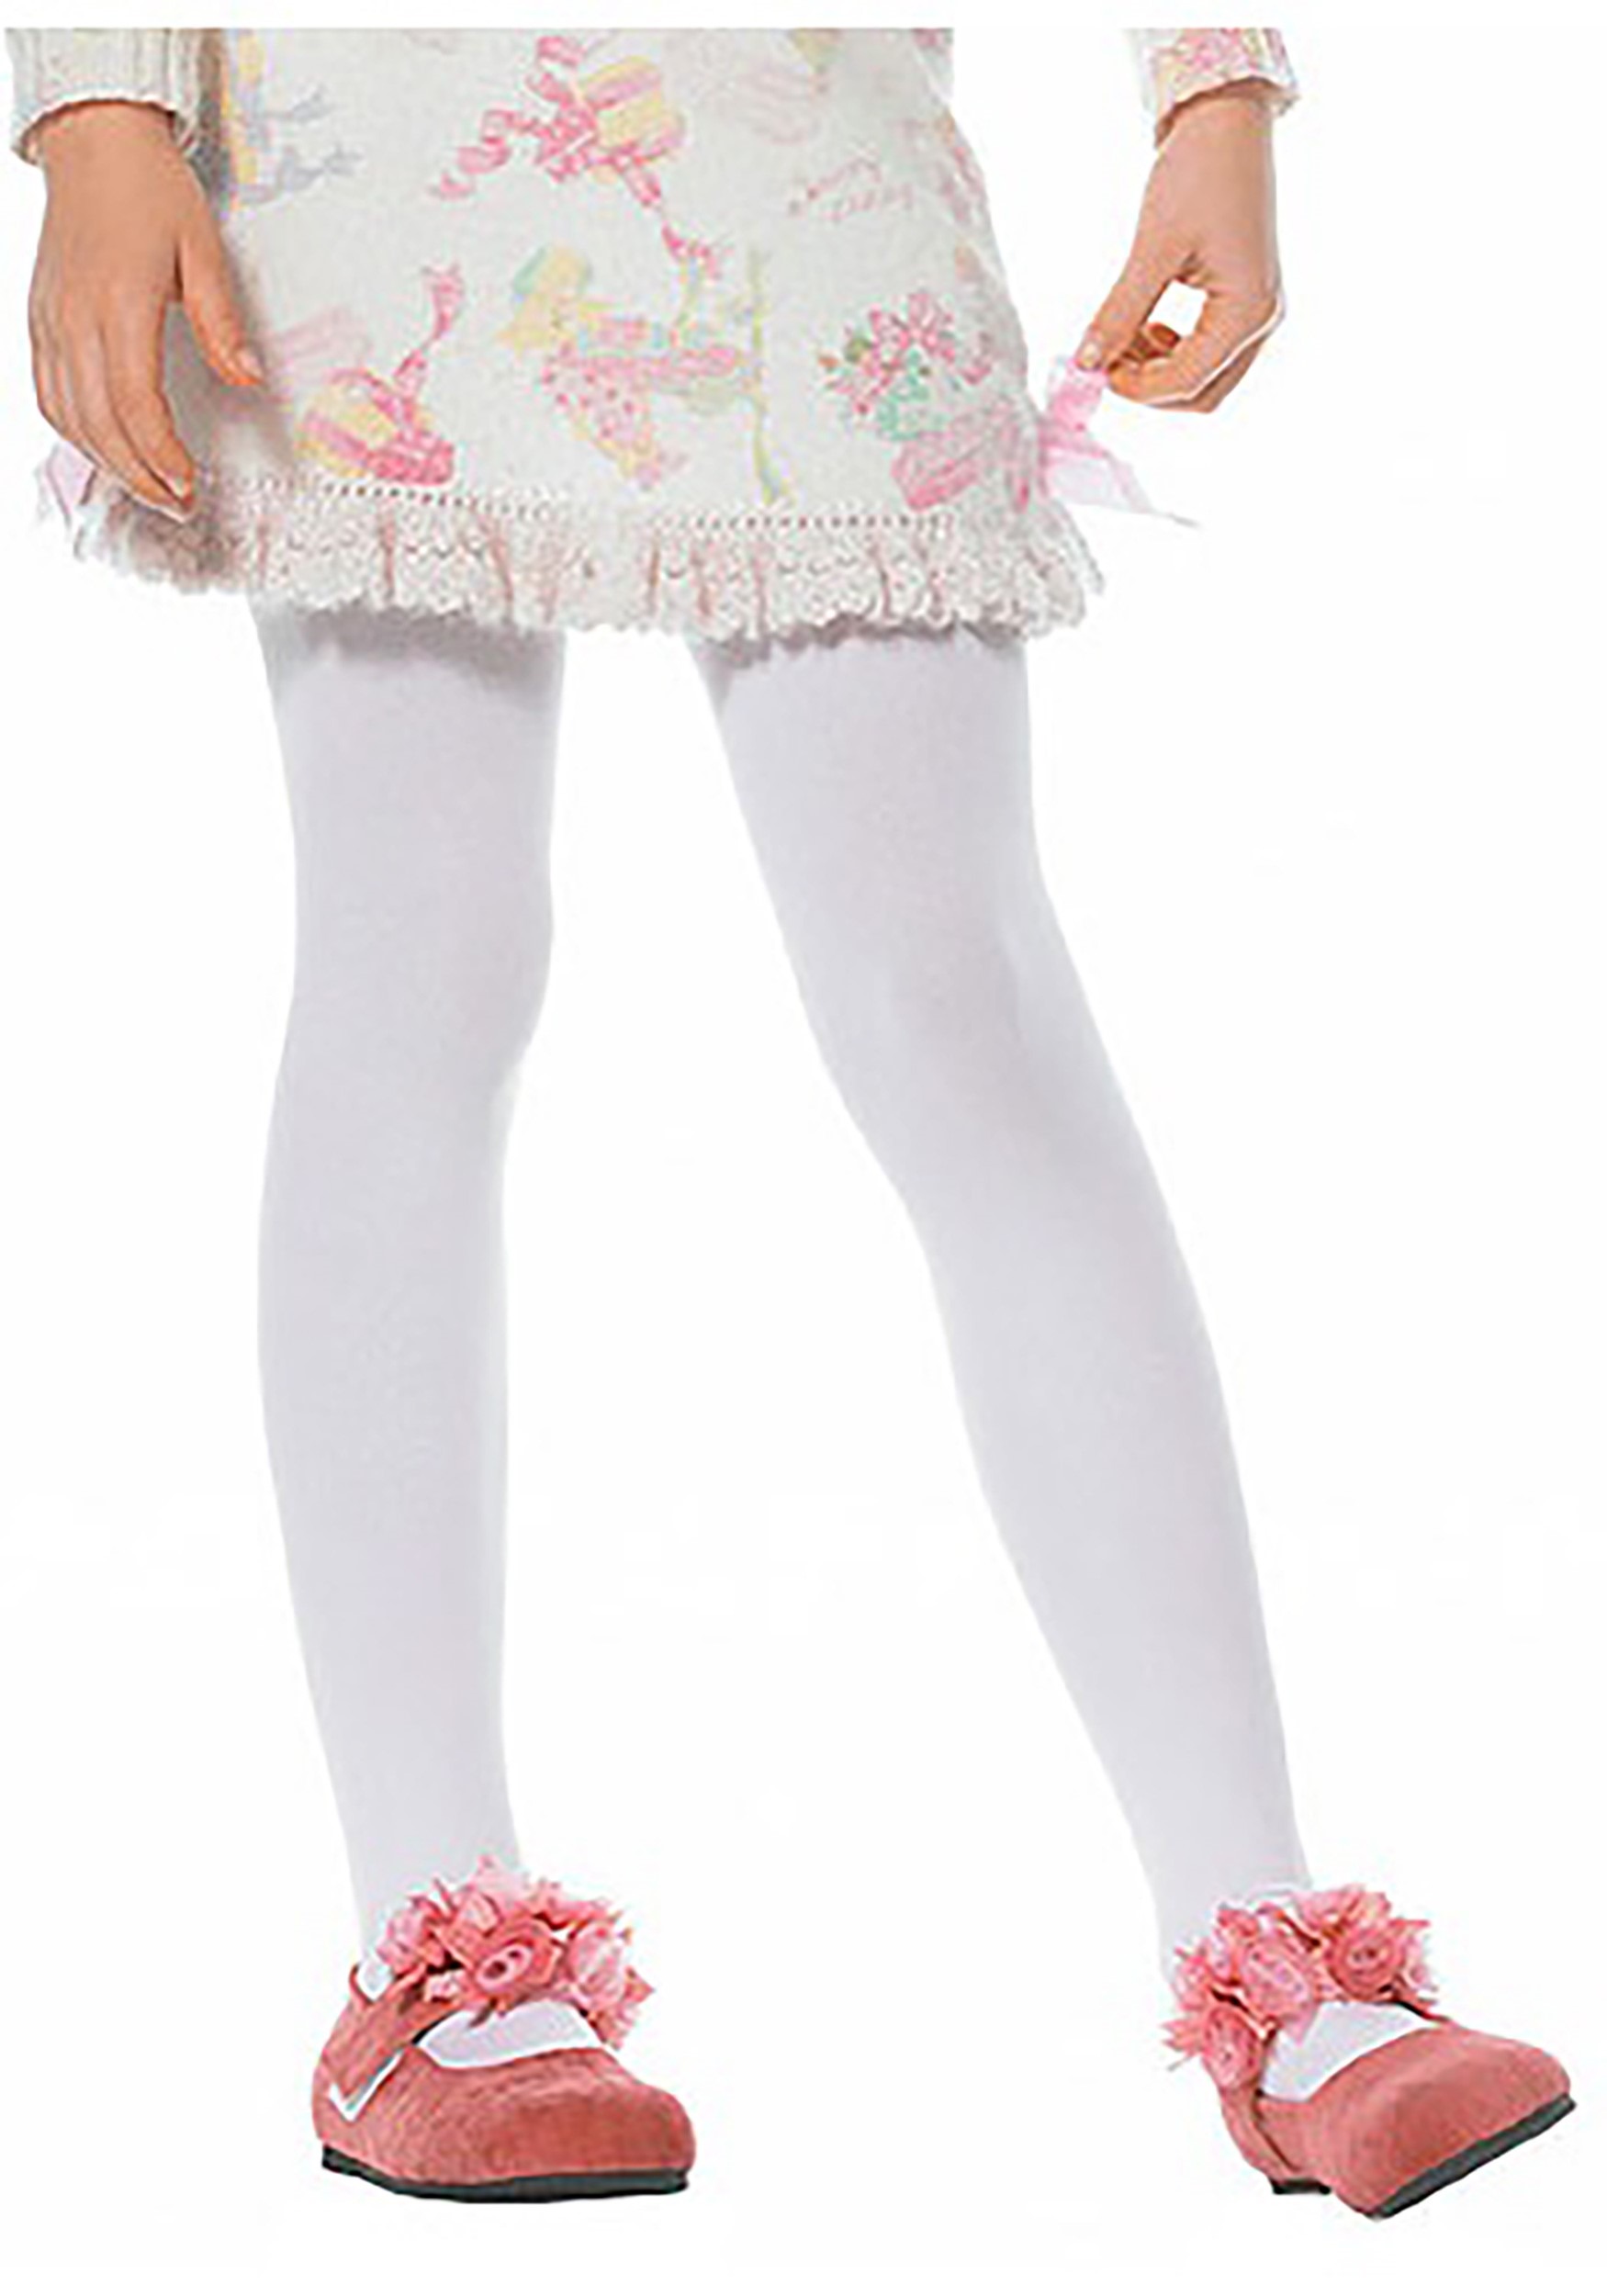 https://images.halloweencostumes.com/products/6562/1-1/kids-white-tights.jpg